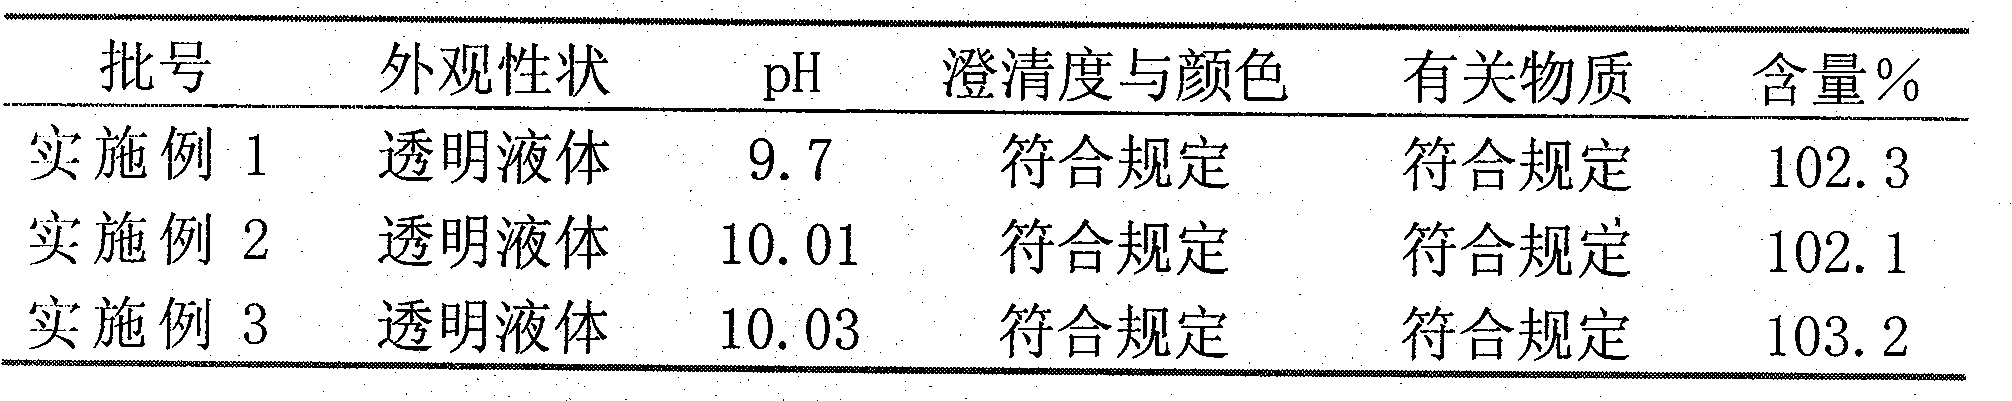 Stable tegafur injection formula and preparation process thereof